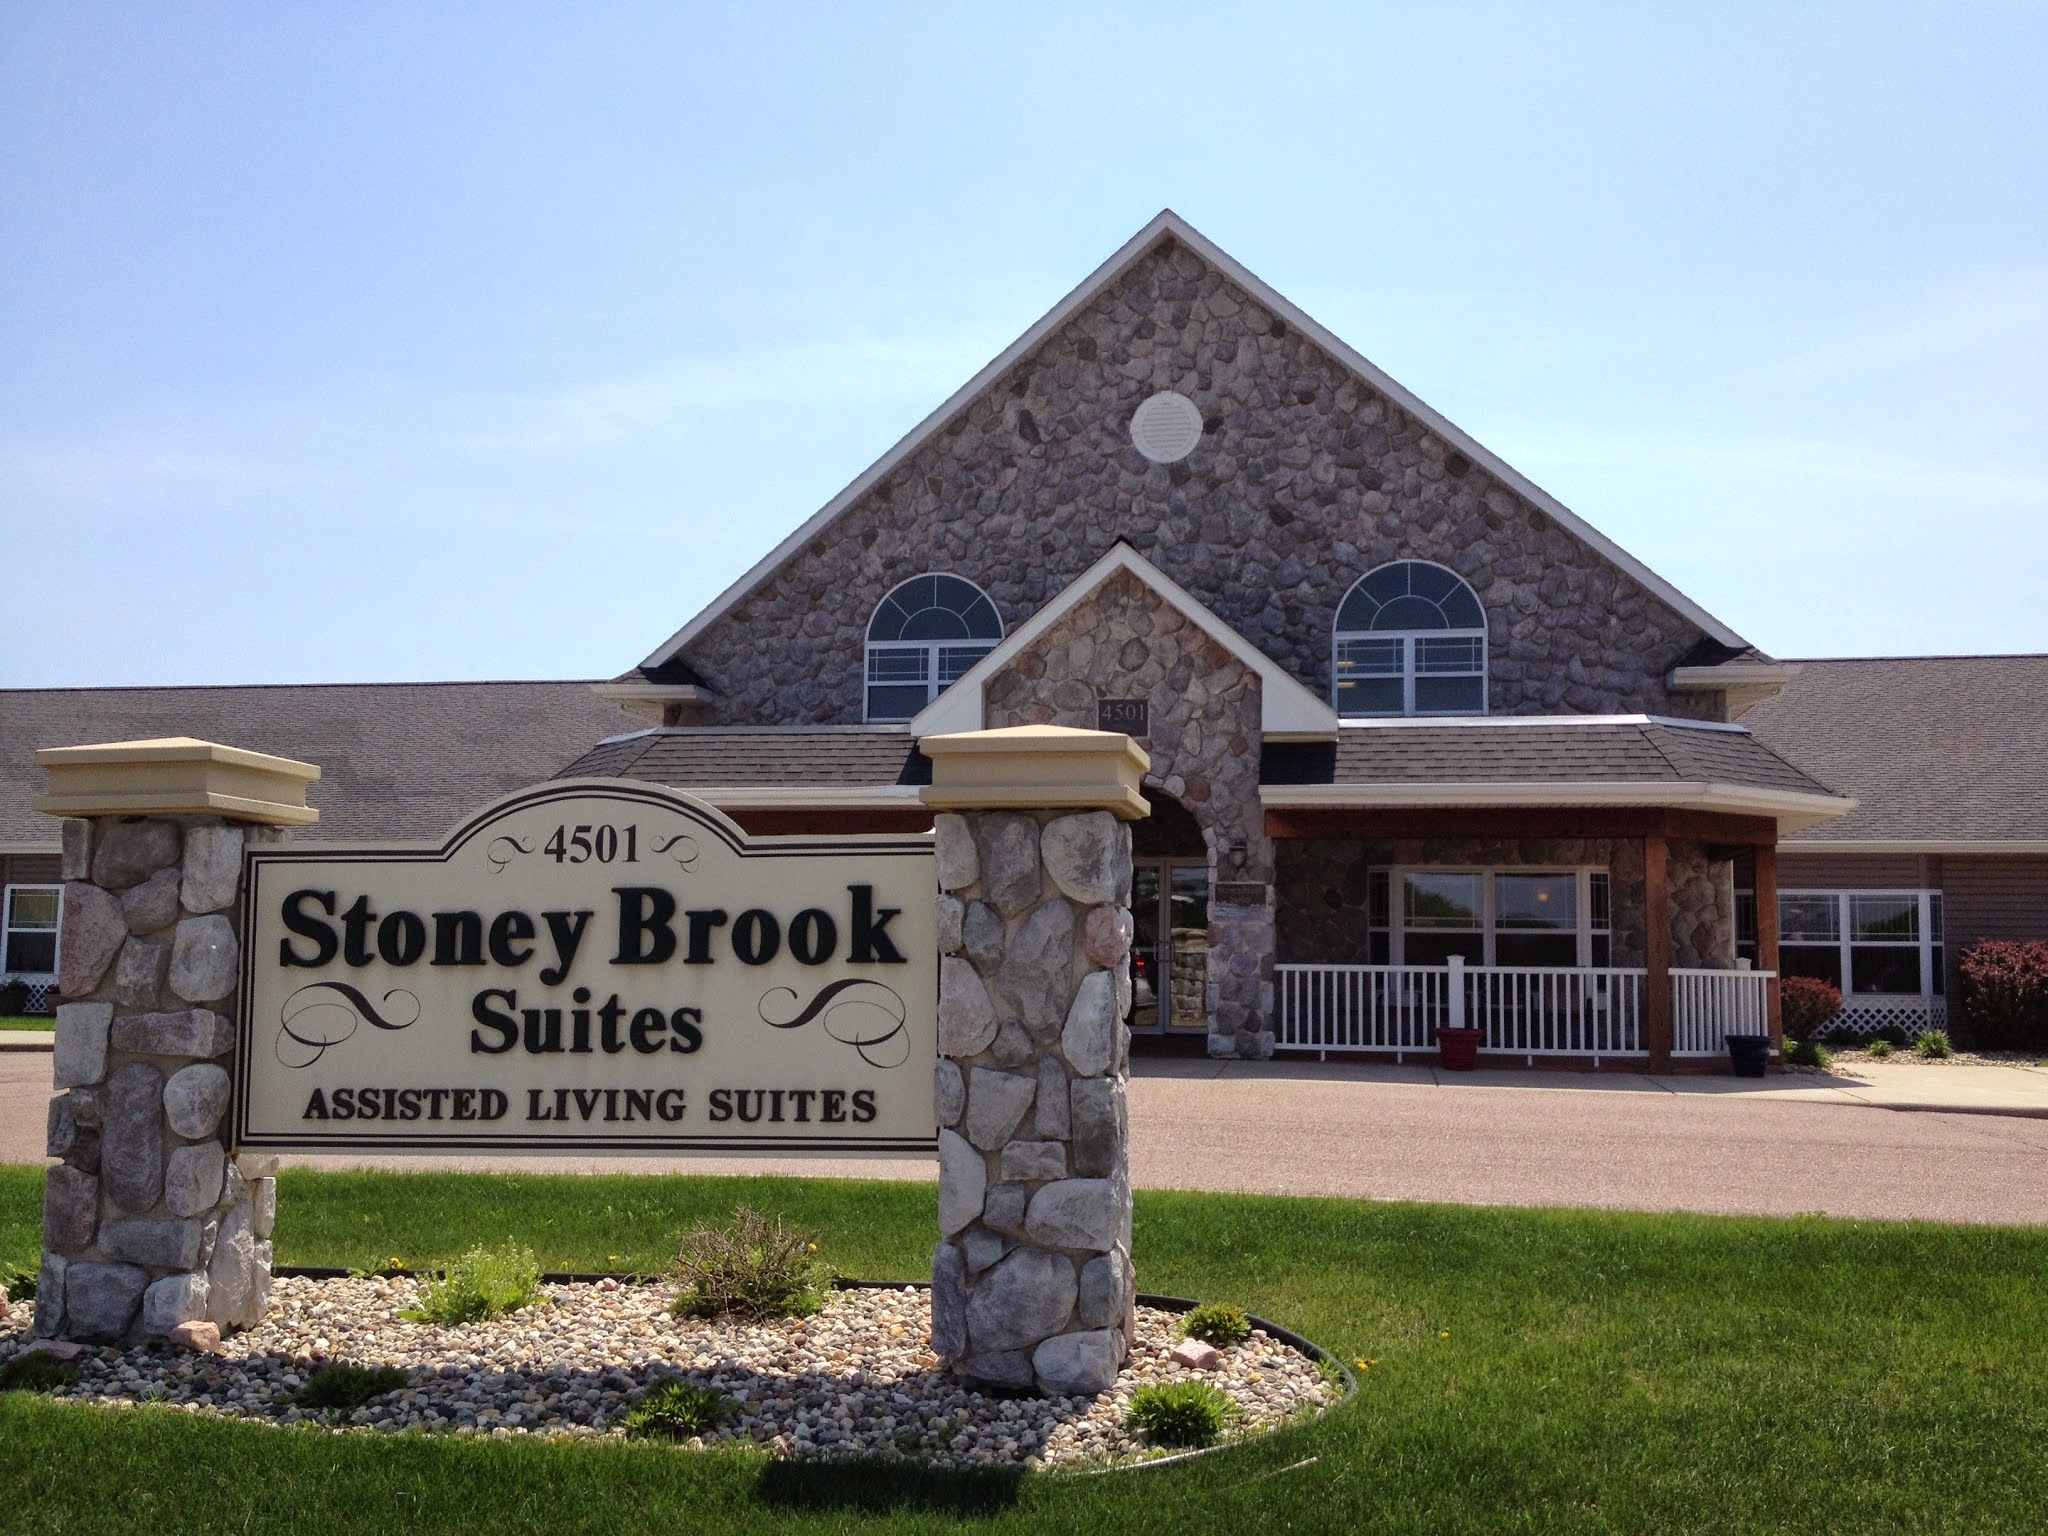 StoneyBrook Suites Assisted Living - Sioux Falls